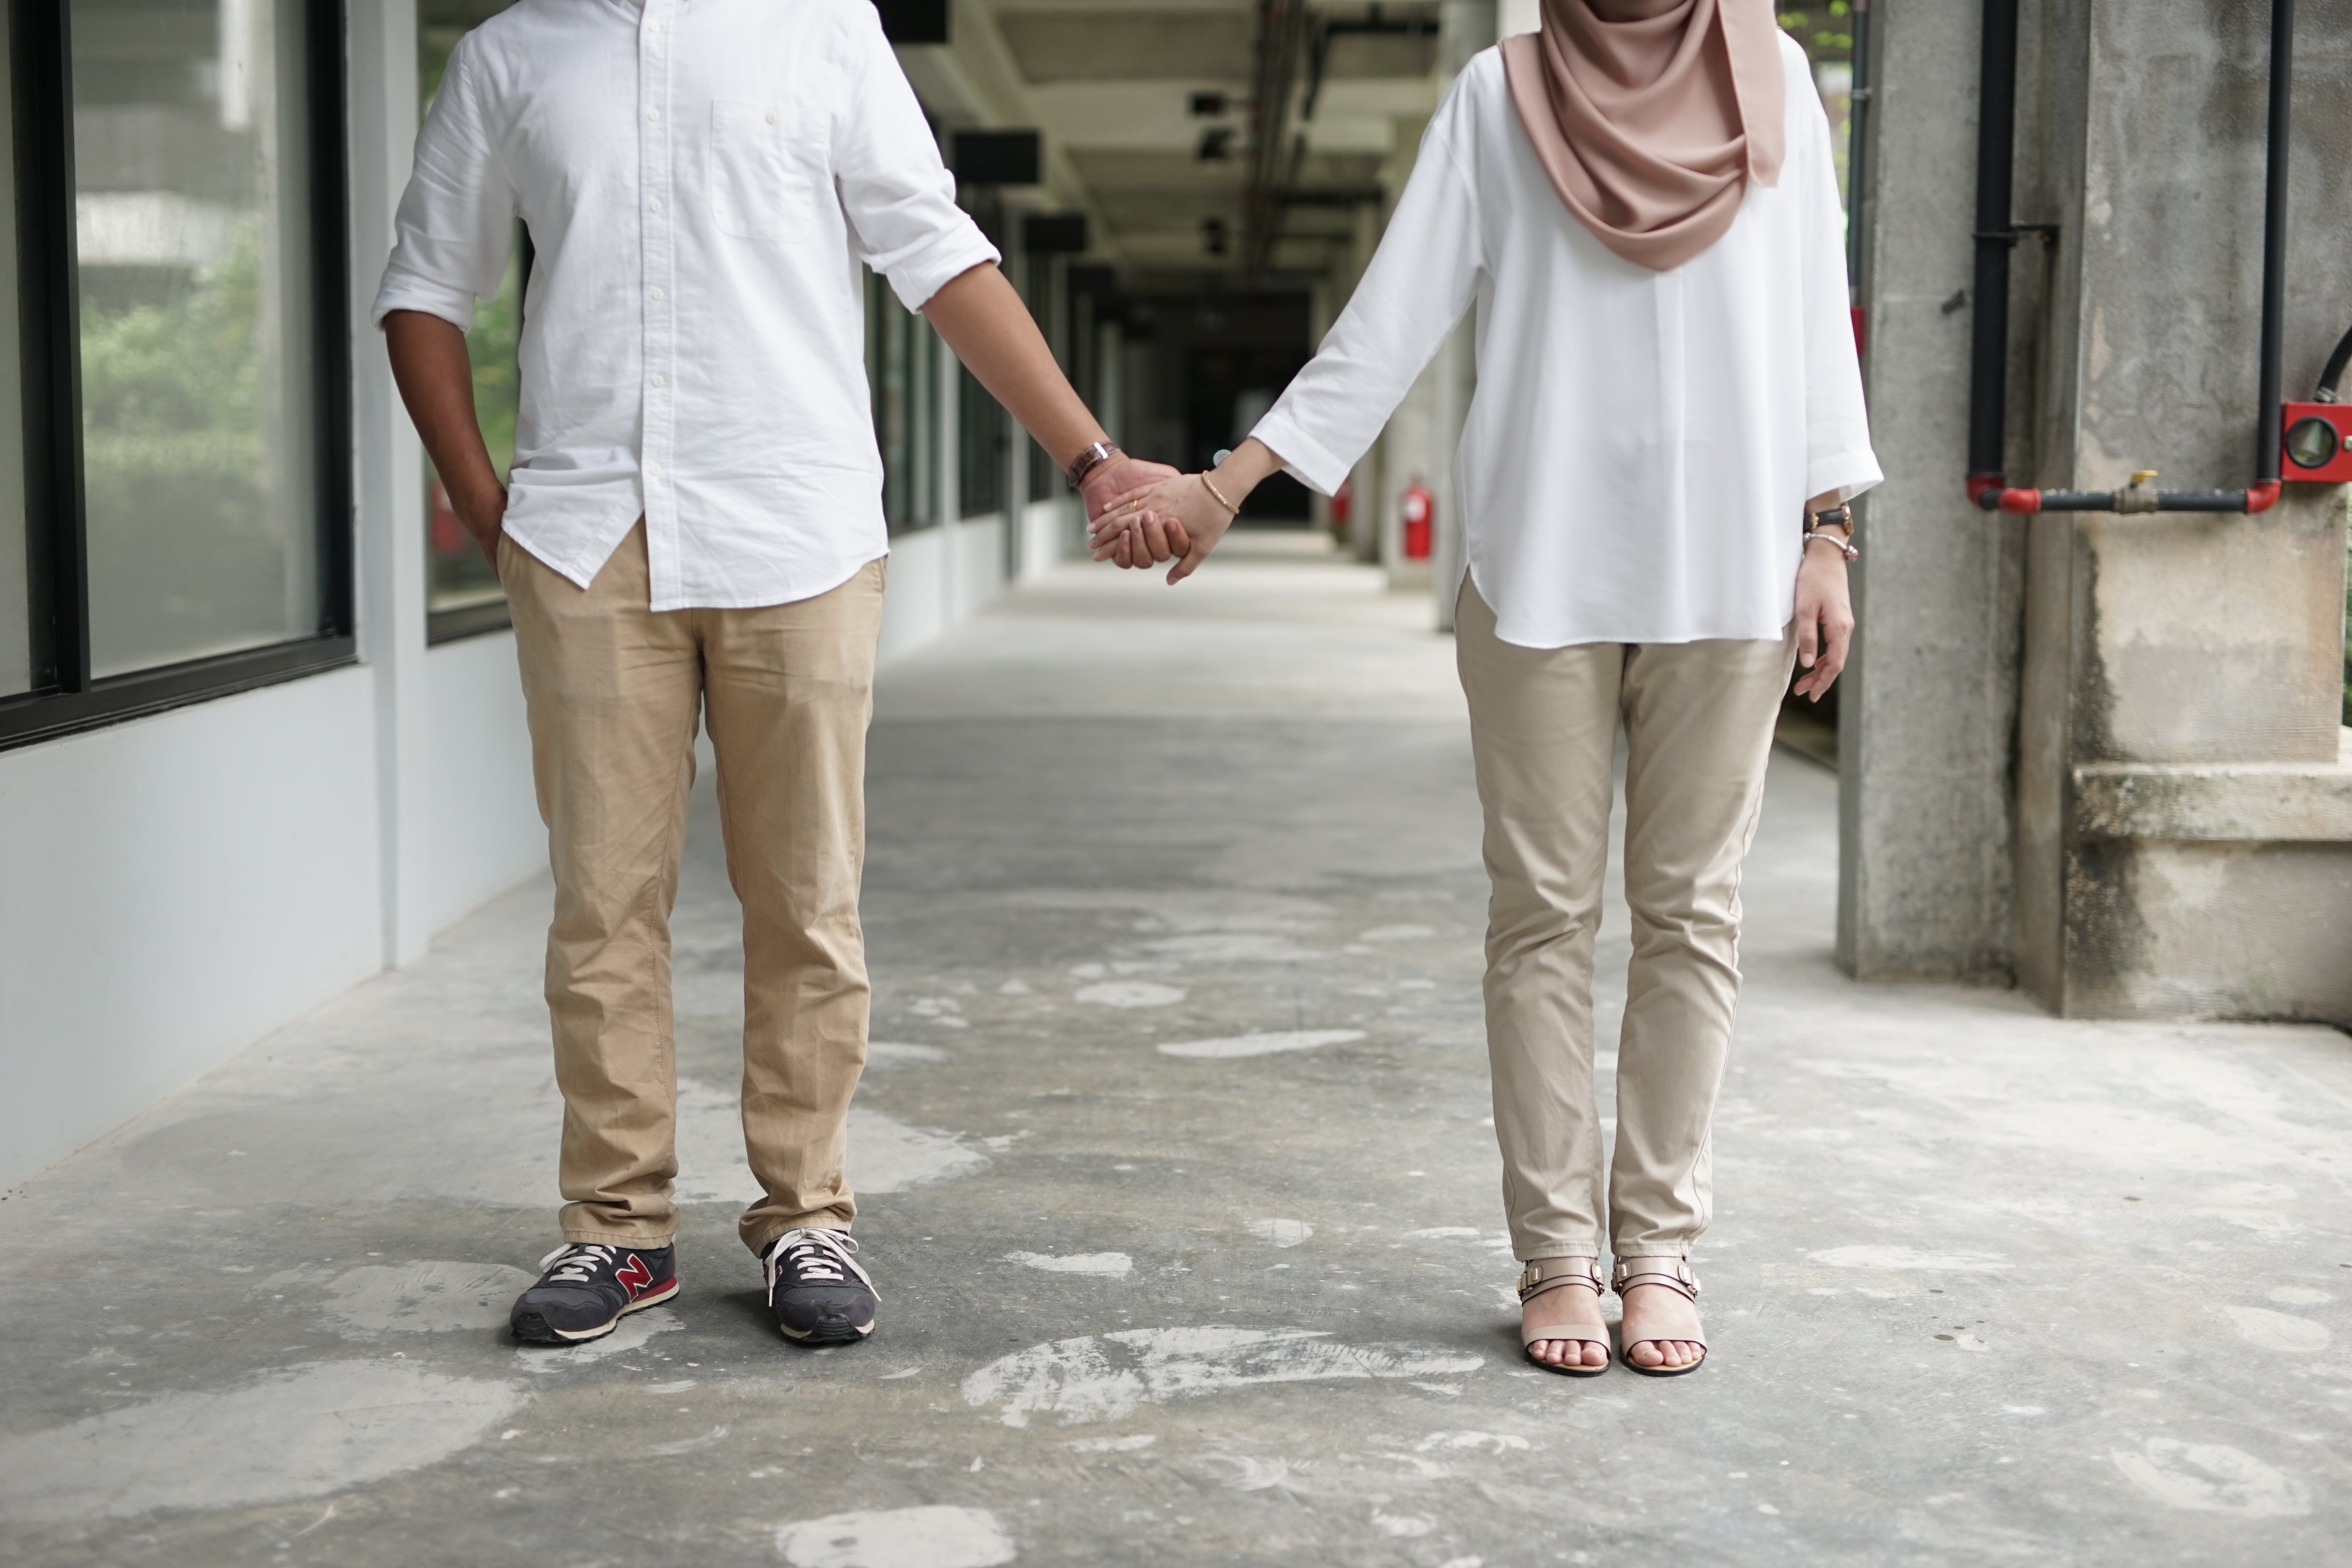 Malaysia does not recognise civil marriages between Muslims and non-Muslims. Photo: Shutterstock